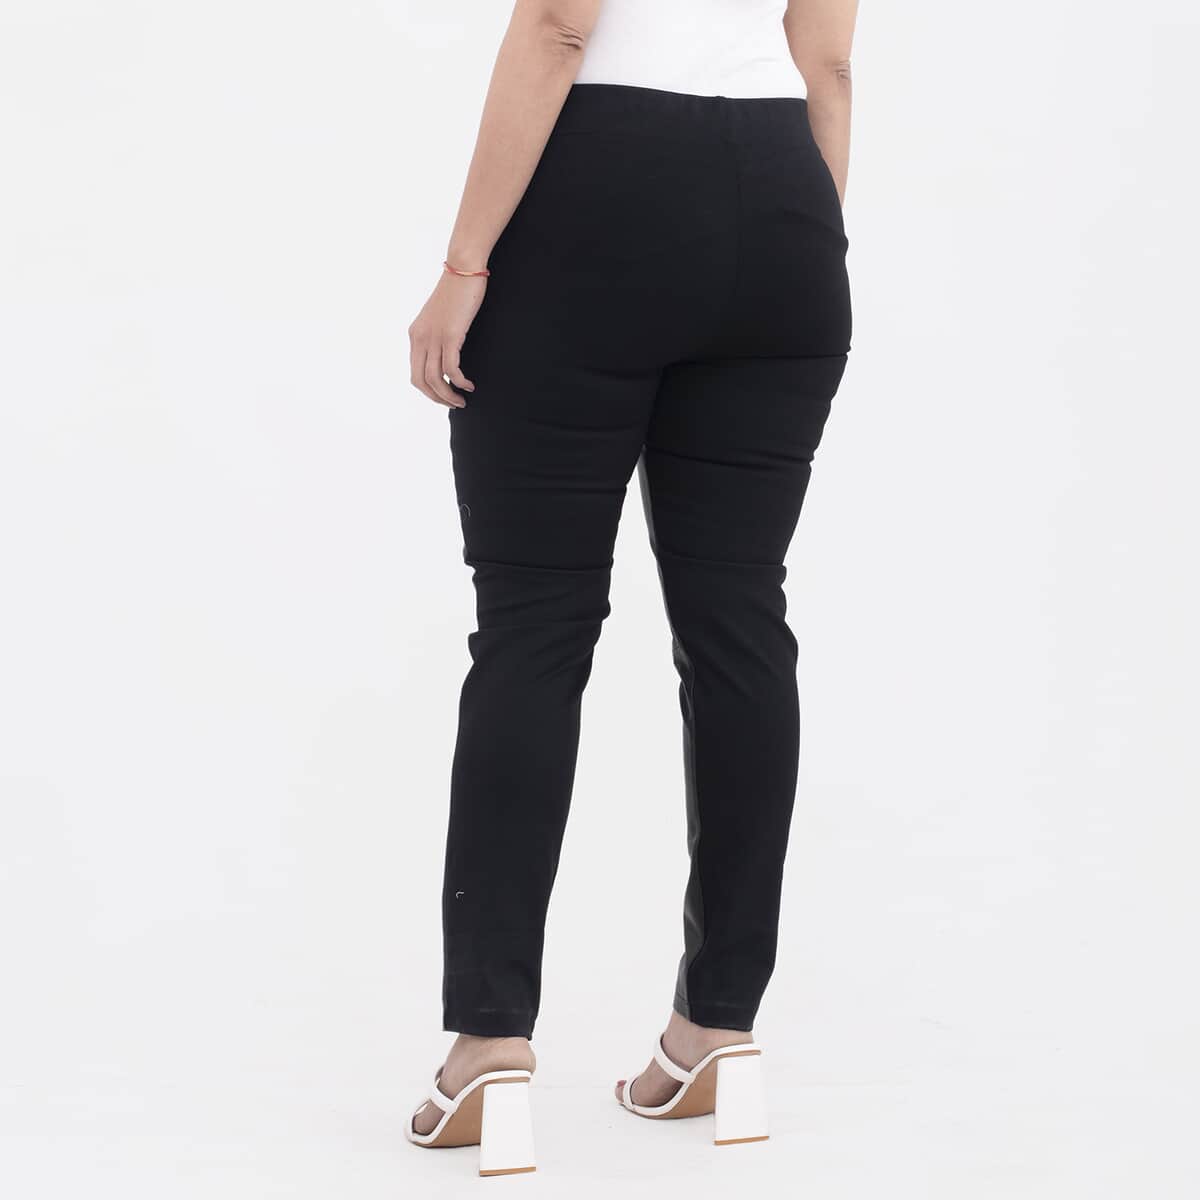 TAMSY Black Genuine Lamb Leather With Back Ponte Knit Legging - S image number 1